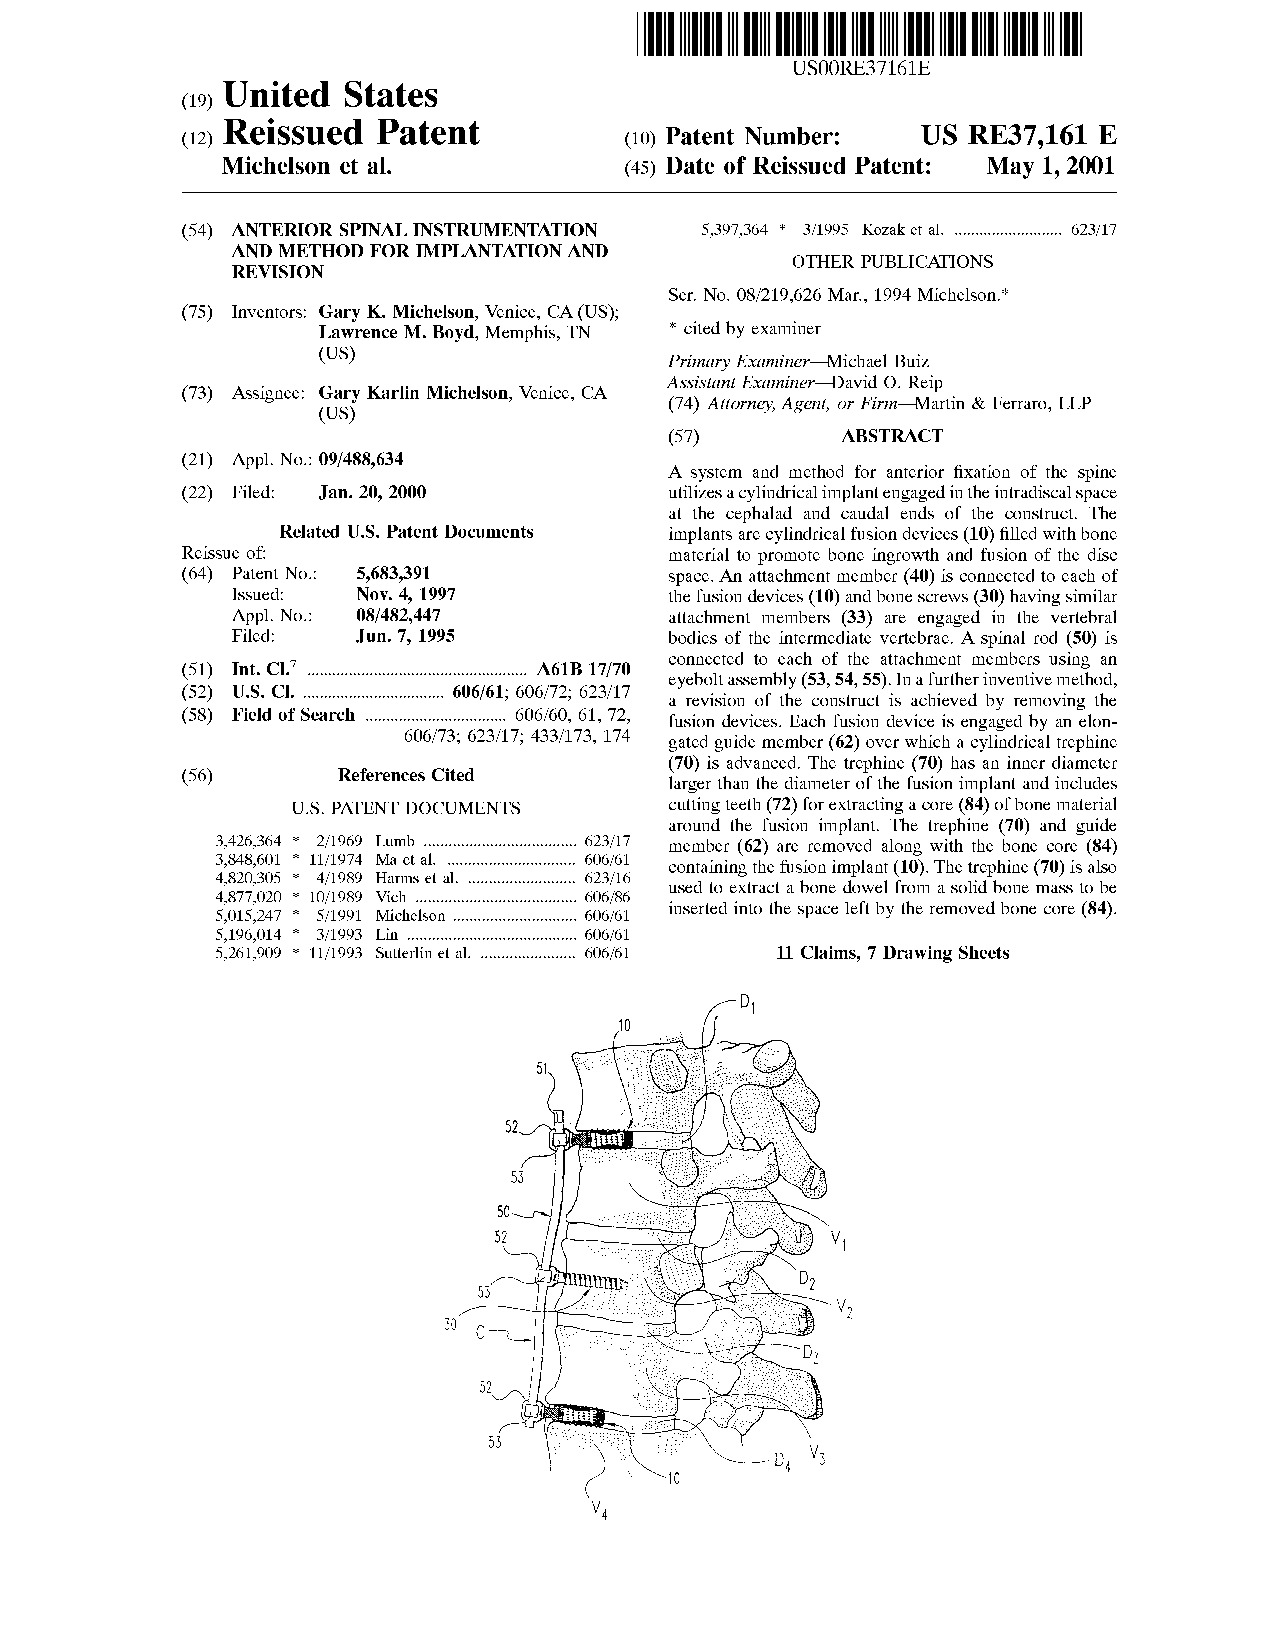 Anterior spinal instrumentation and method for implantation and revision - Patent RE37,161